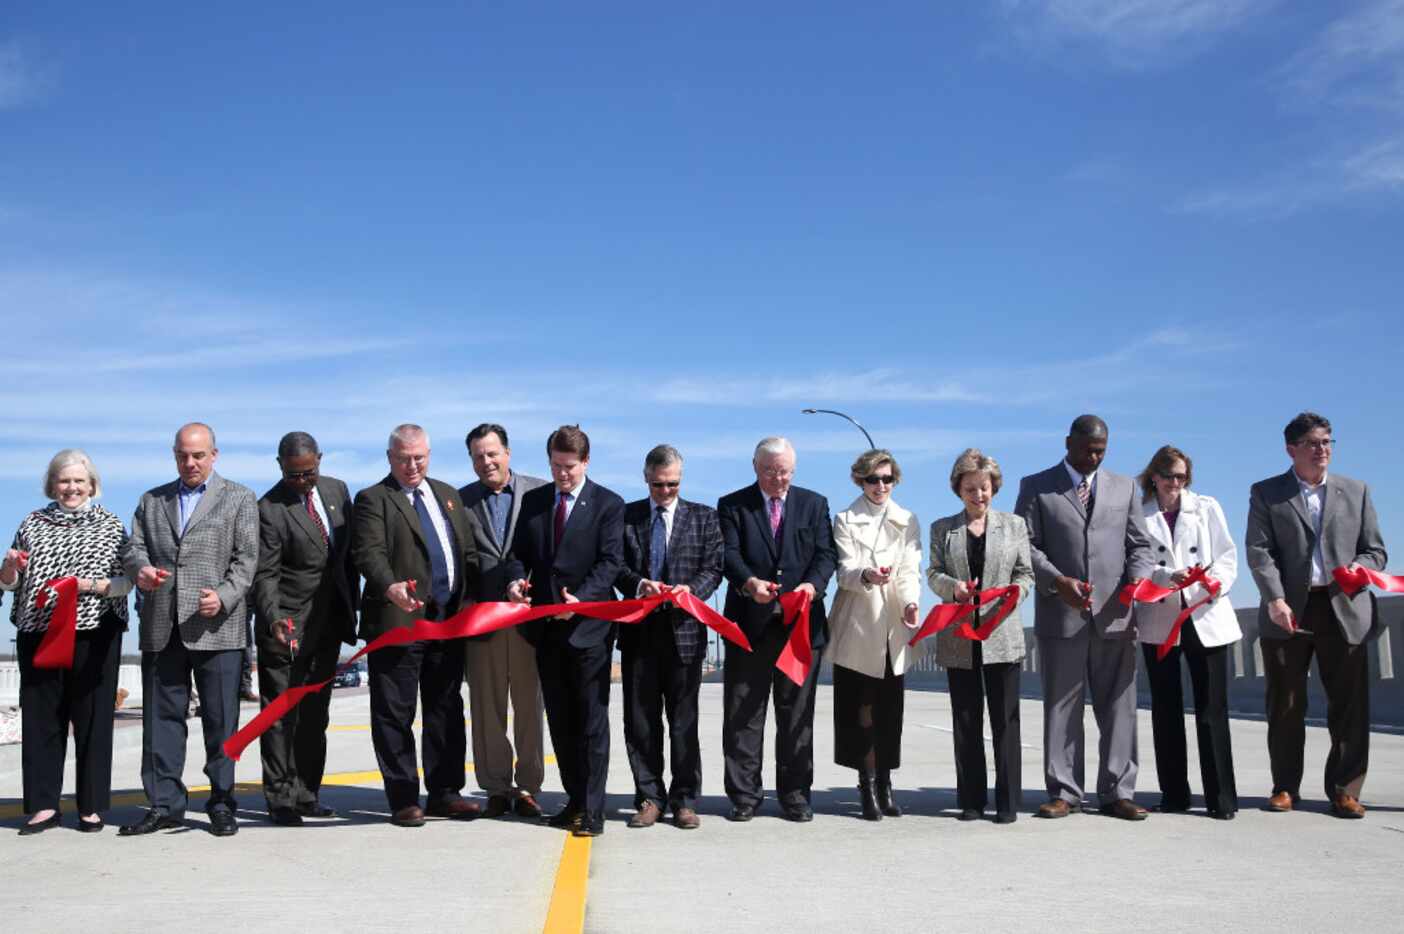 City officials gathered with lawmakers and state engineers to open the new overpass at...